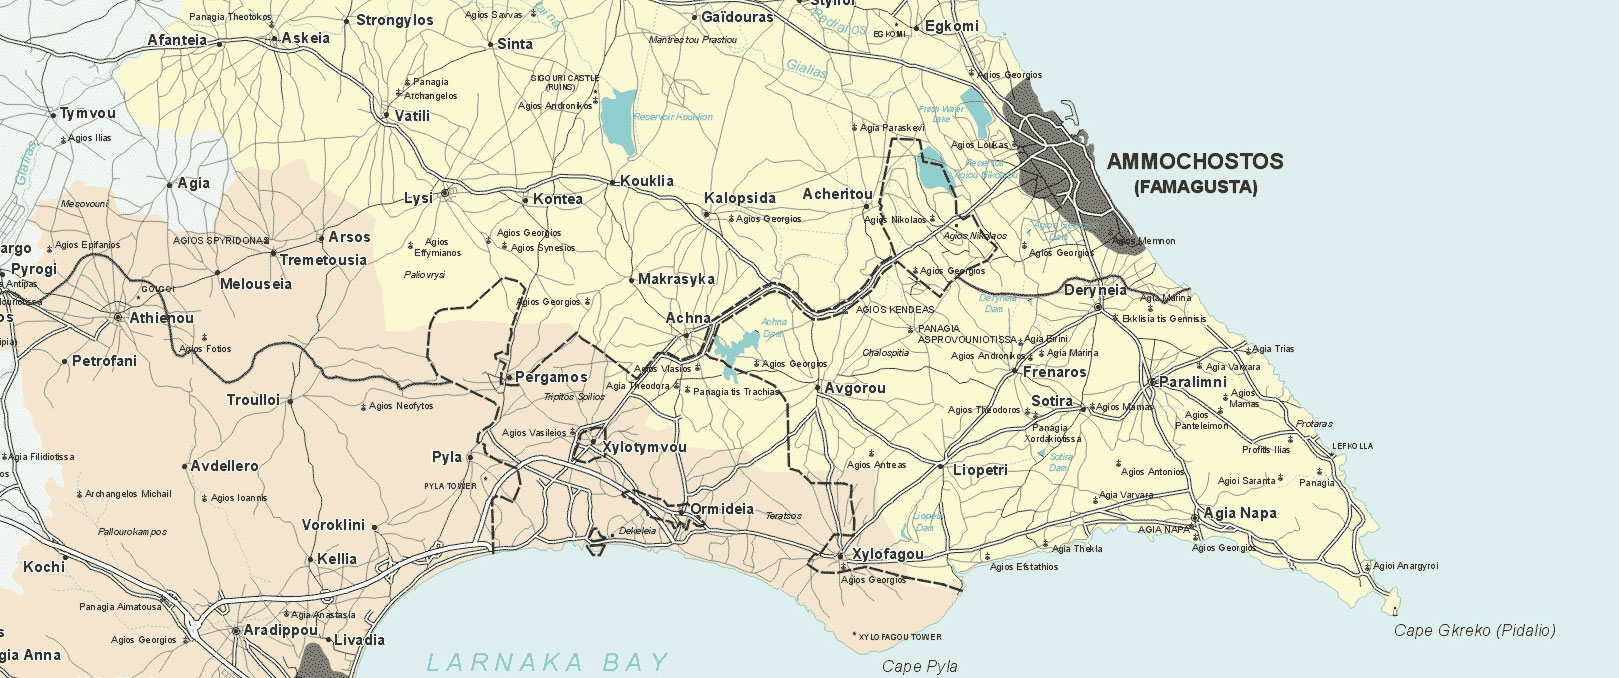 Street Map of Famagusta | Map of the Famagusta District | Maps of Cyprus